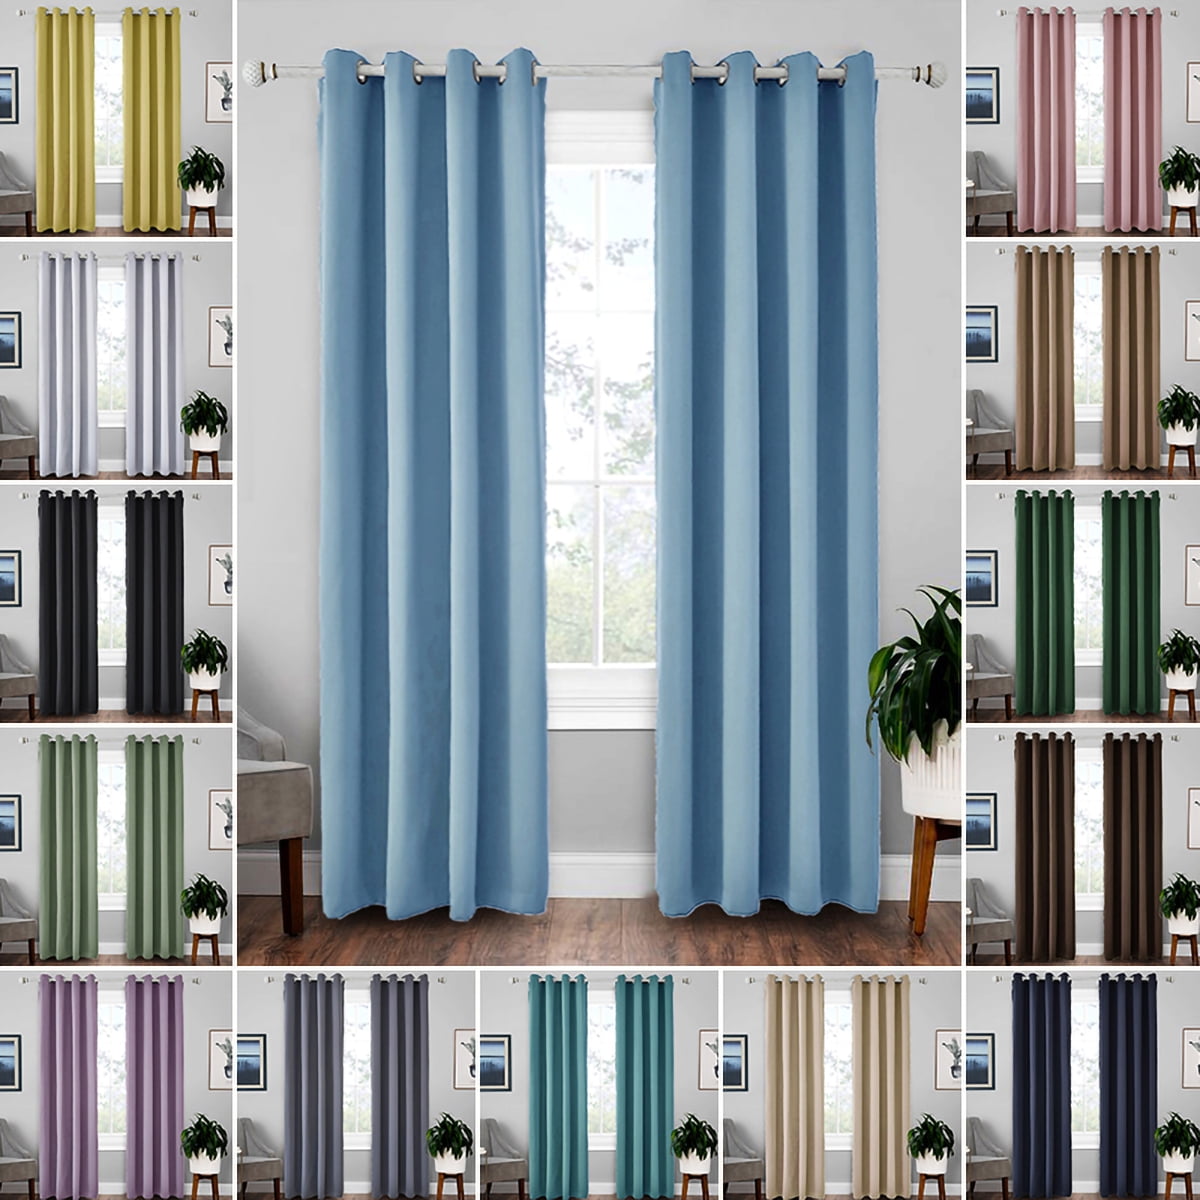 RING TOP THERMAL BLACKOUT PAIR EYELET READY MADE CURTAINS BLACK CREAM BLUE PINK 